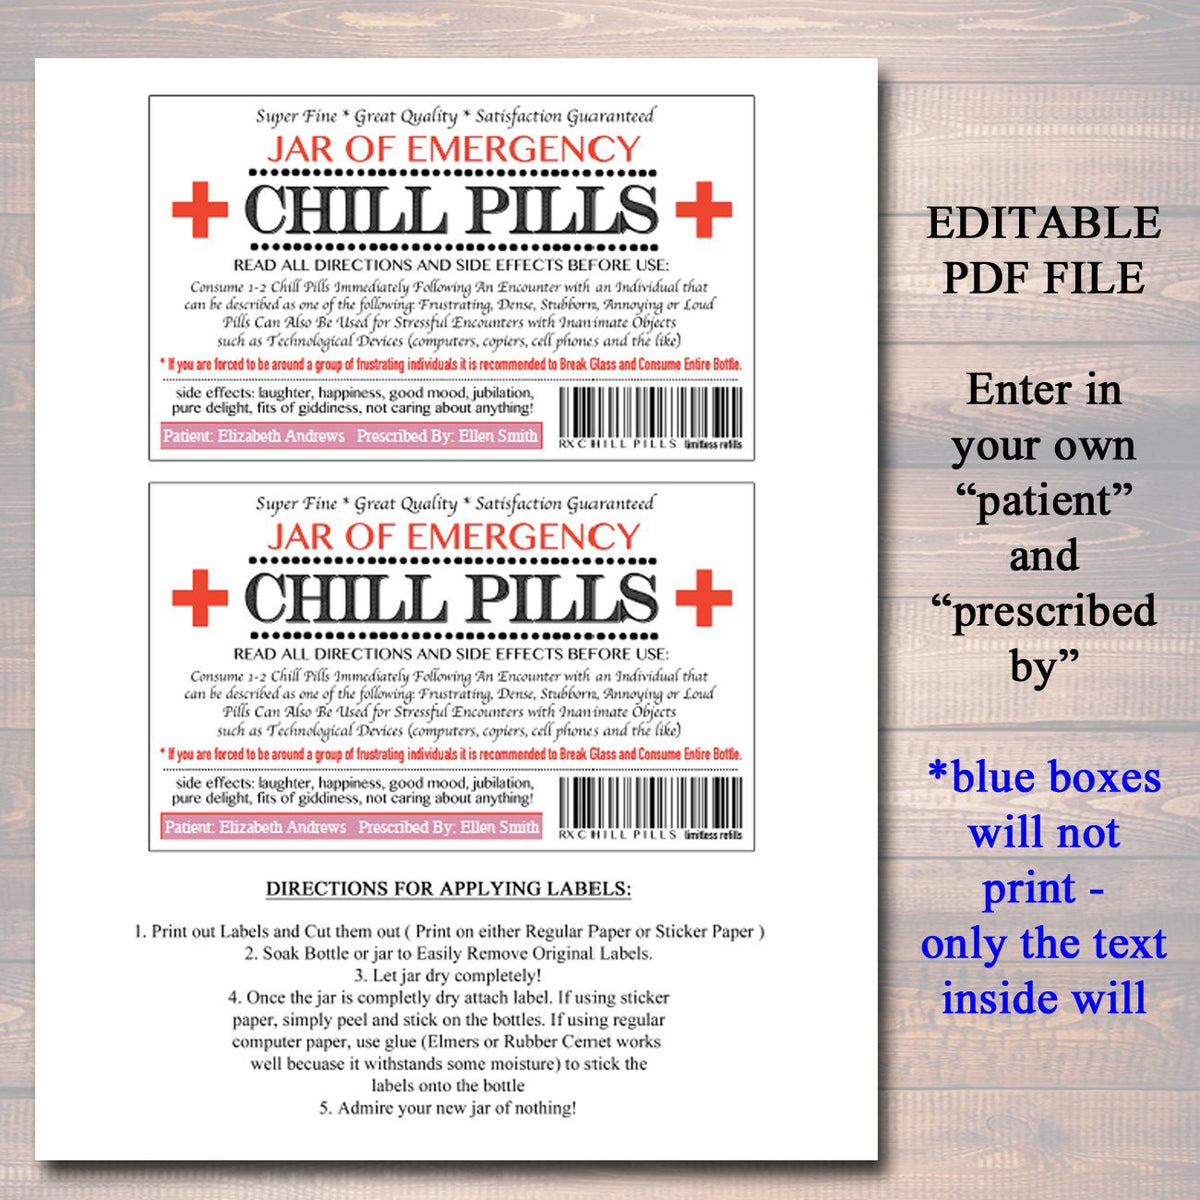 editable-chill-pills-label-funny-gag-gift-professional-office-gift-c